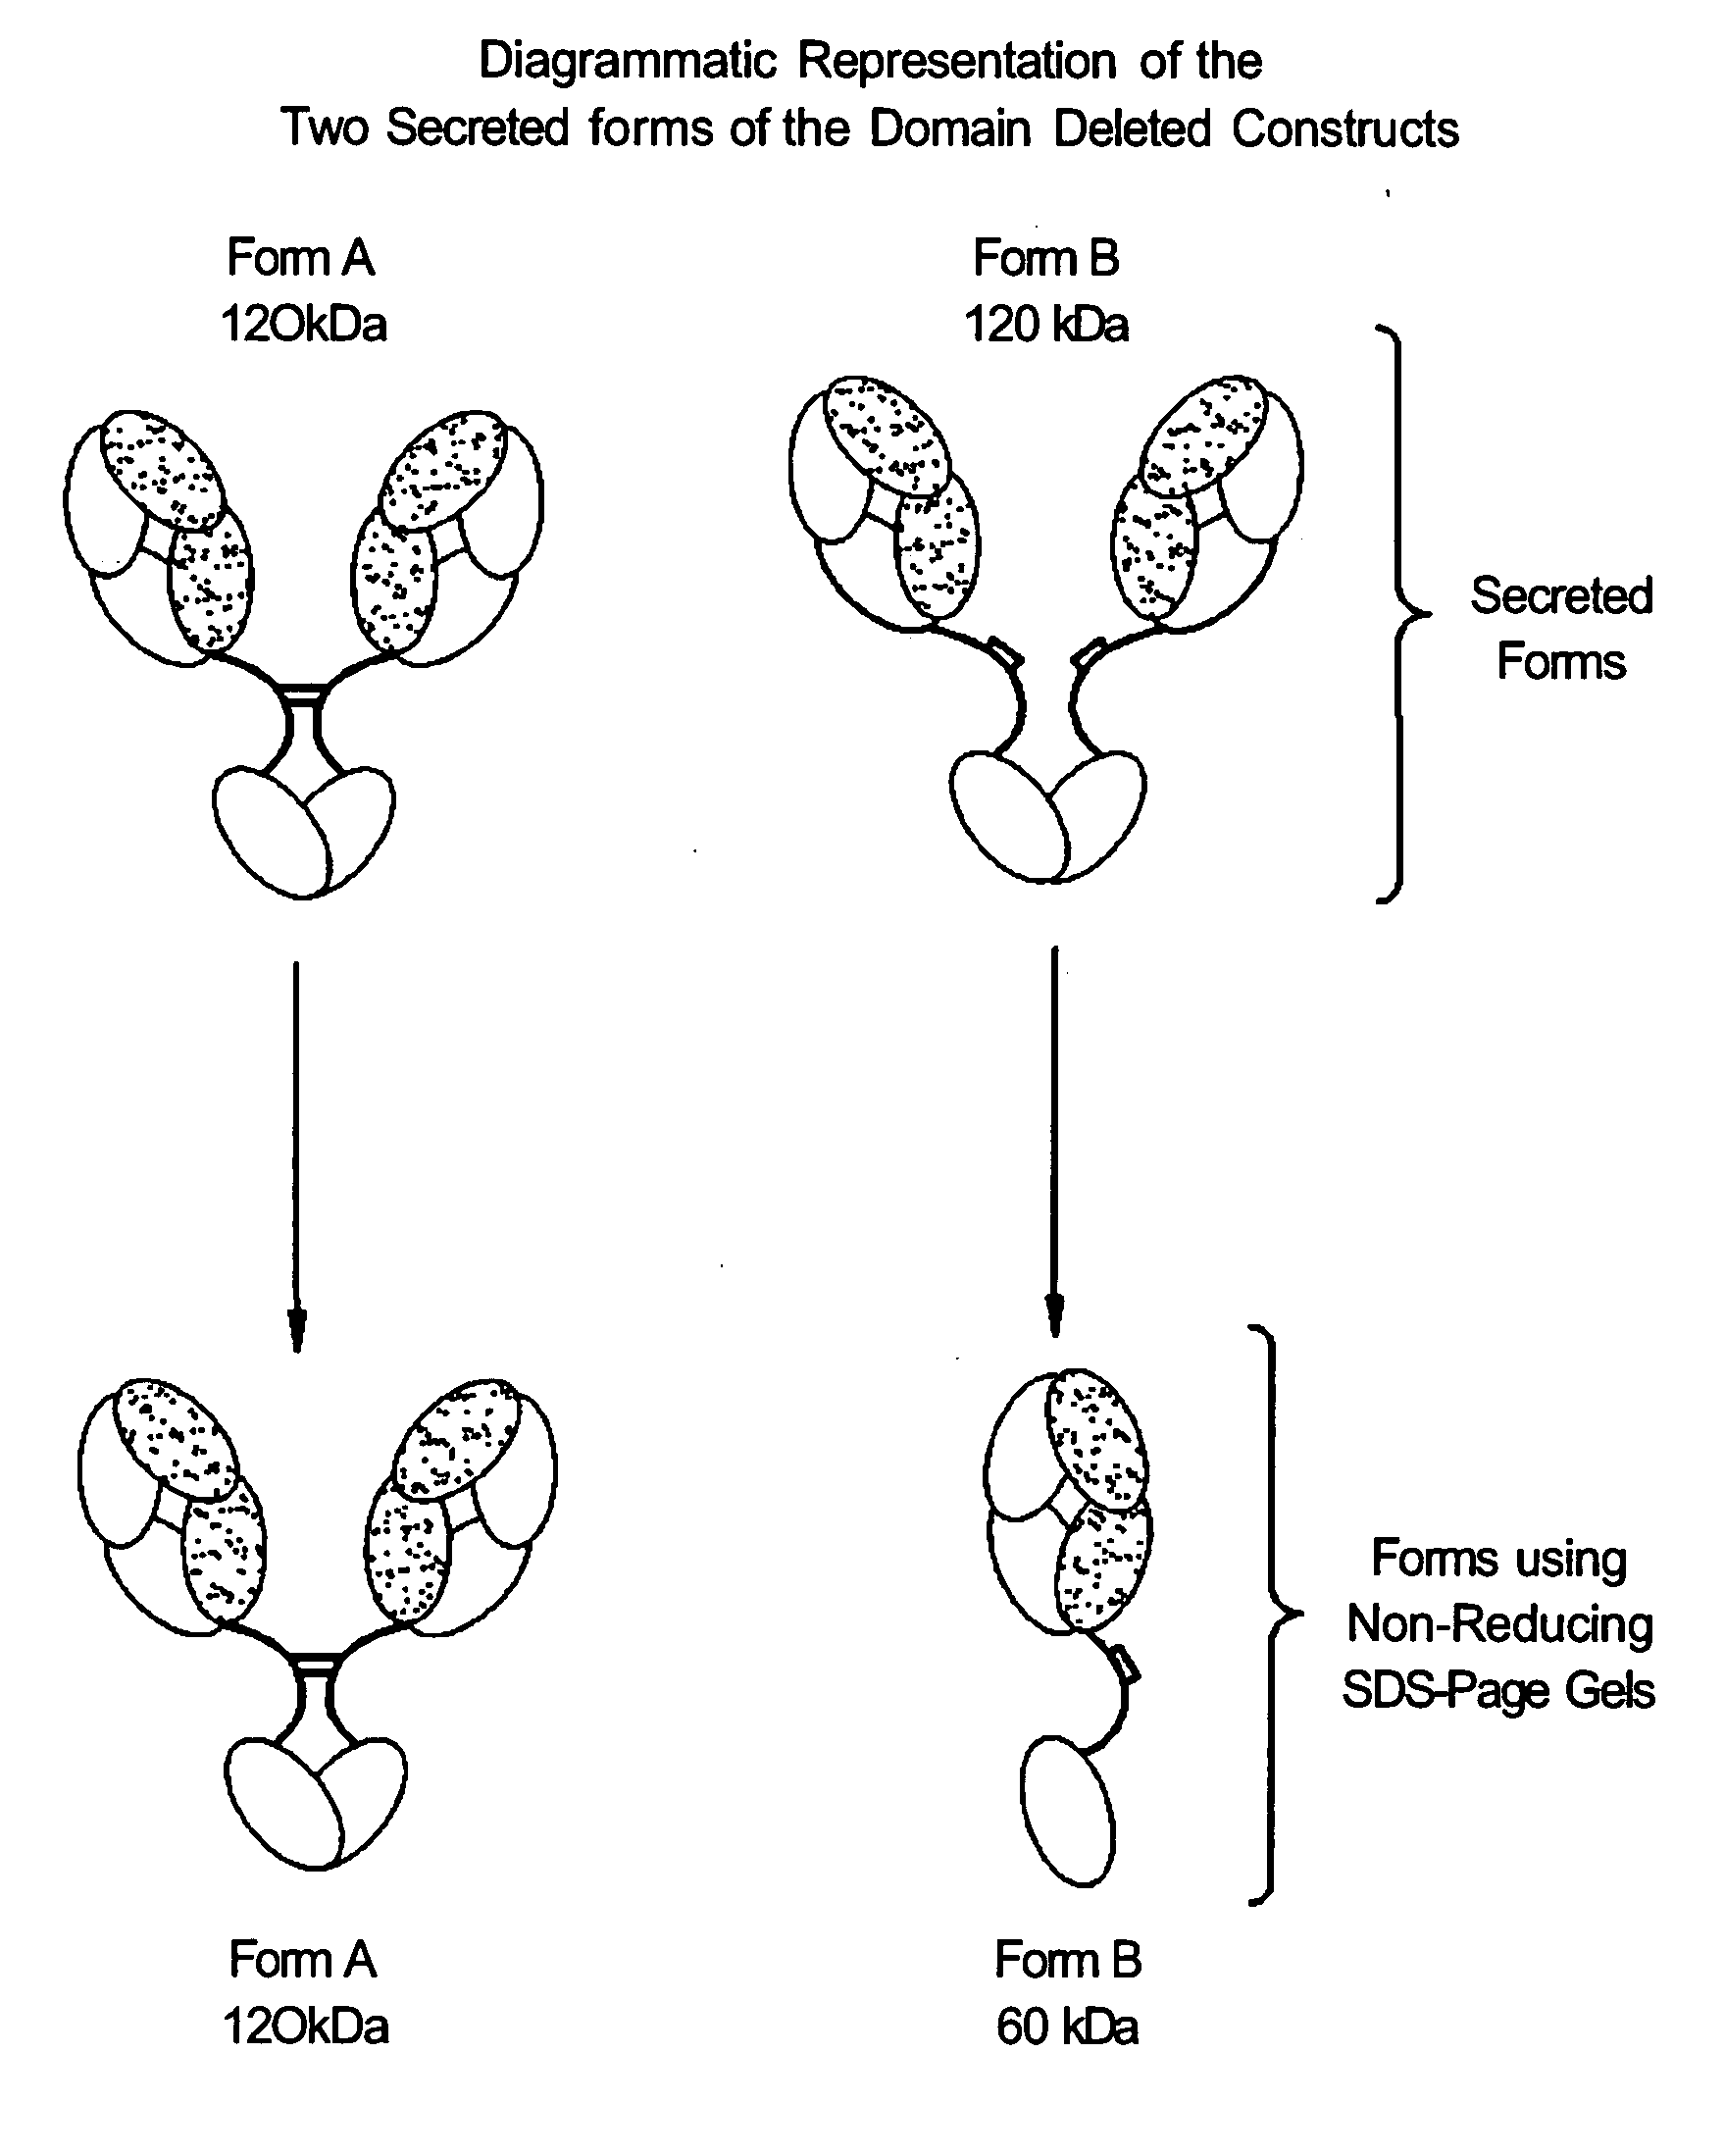 Multispecific binding molecules comprising connecting peptides